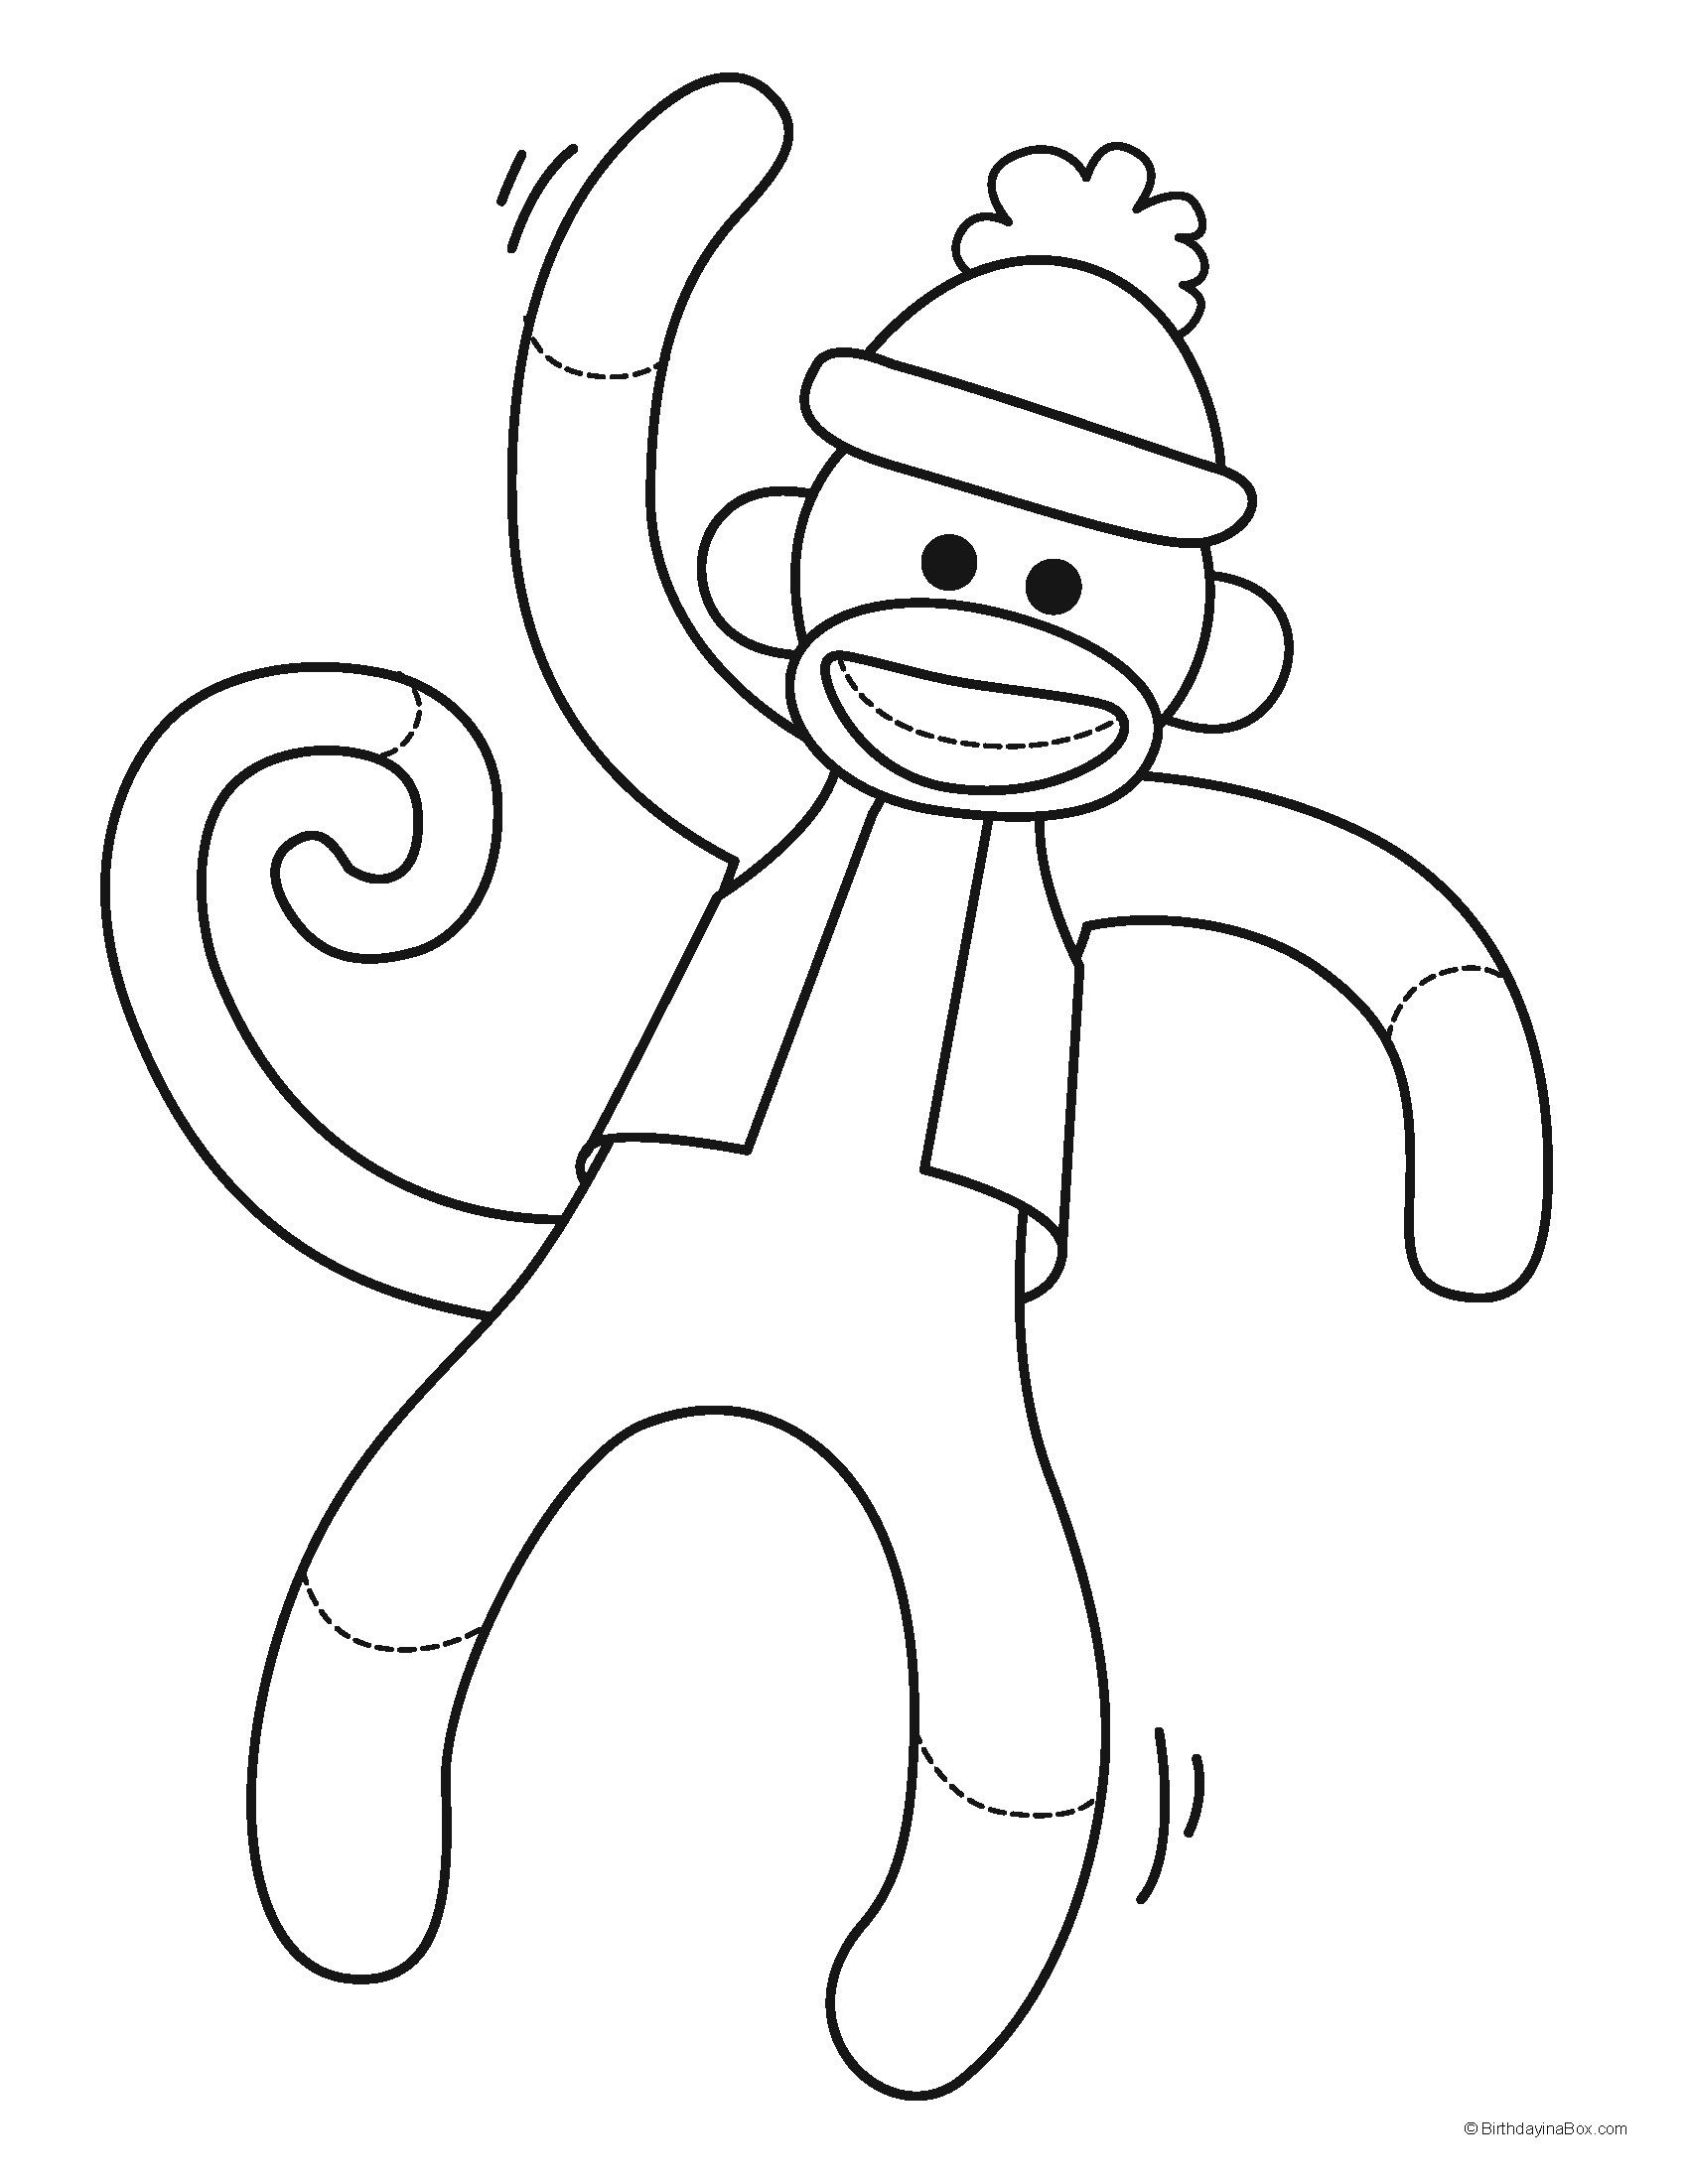 Coloring Page | Kid's Birthday Ideas | Sock Monkey Party, Sock - Free Printable Sock Monkey Pictures